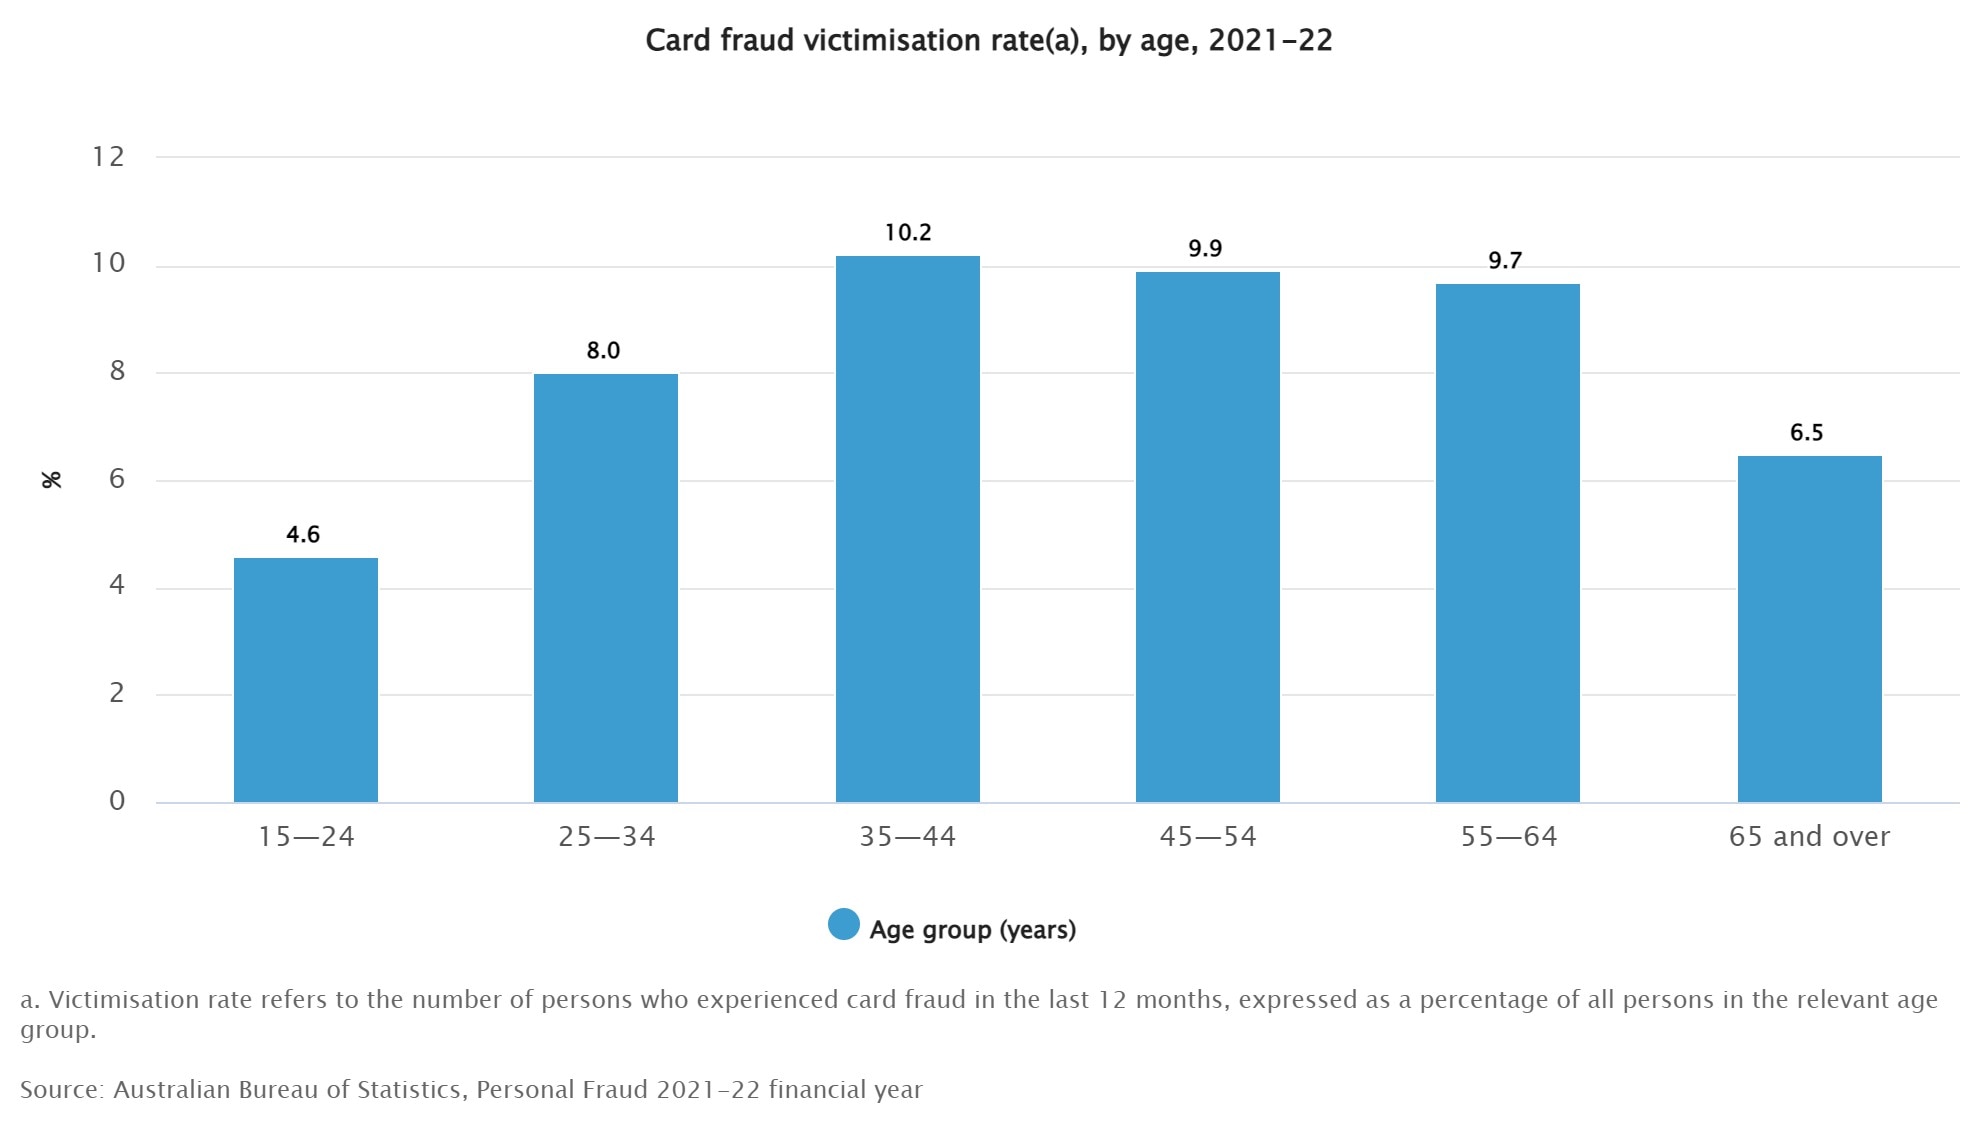 A graph of the age groups impacted by card fraud with 35-44 being the highest, followed by 45-54 and 55-64.